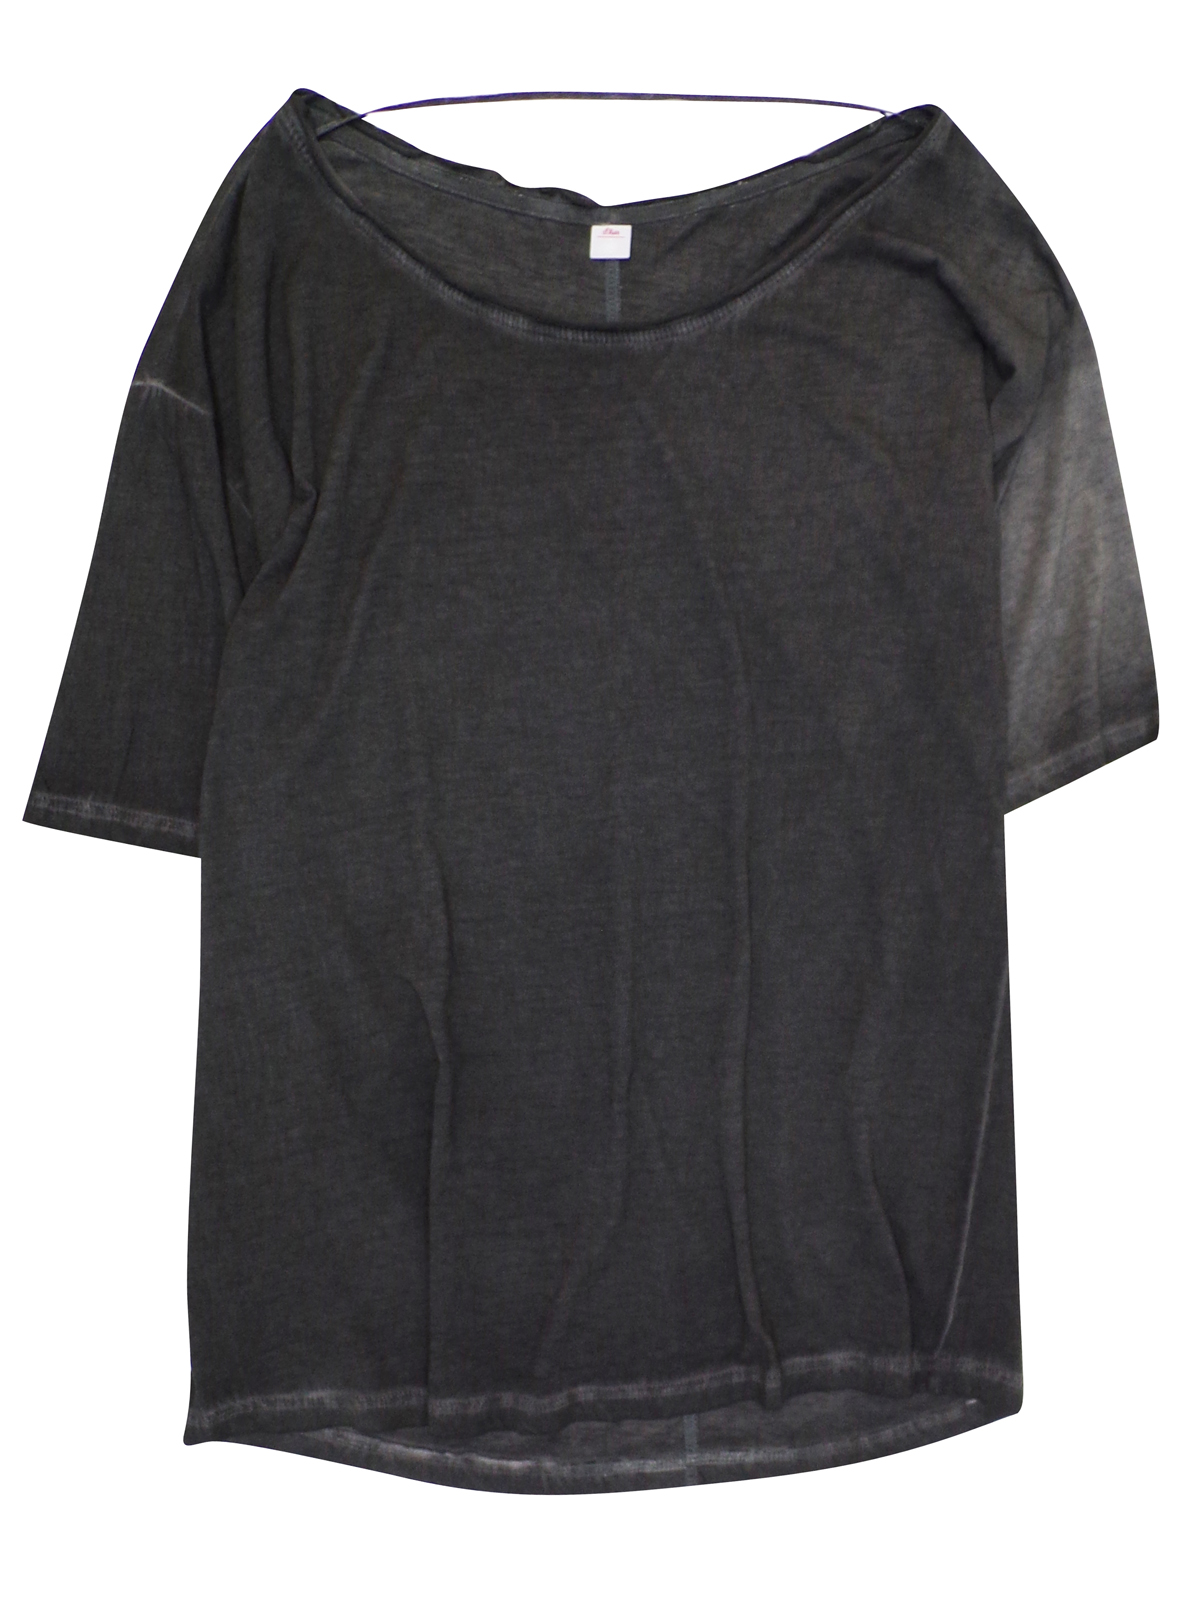 S.Oliver - Triangle - - S.Oliver CHARCOAL Pure Cotton Short Sleeve T ...